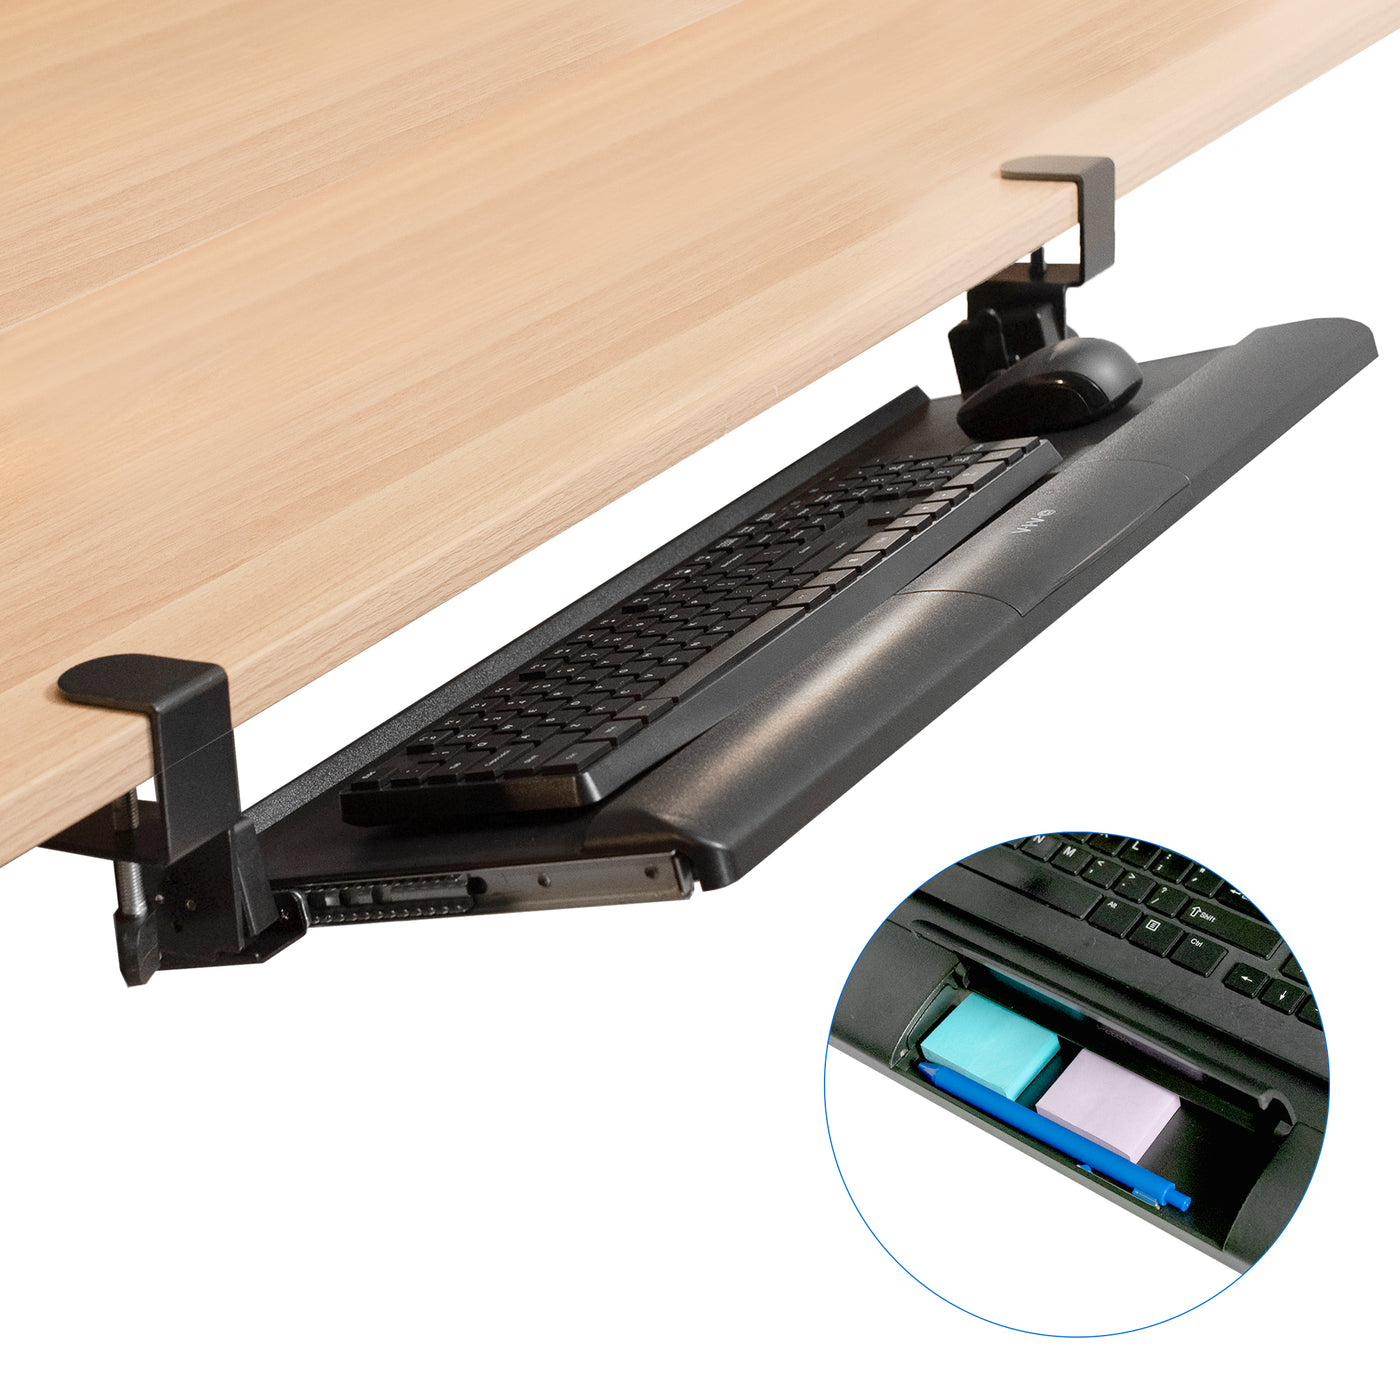 Easy install clamp-on pullout tilting keyboard tray with adjustable typing angles.